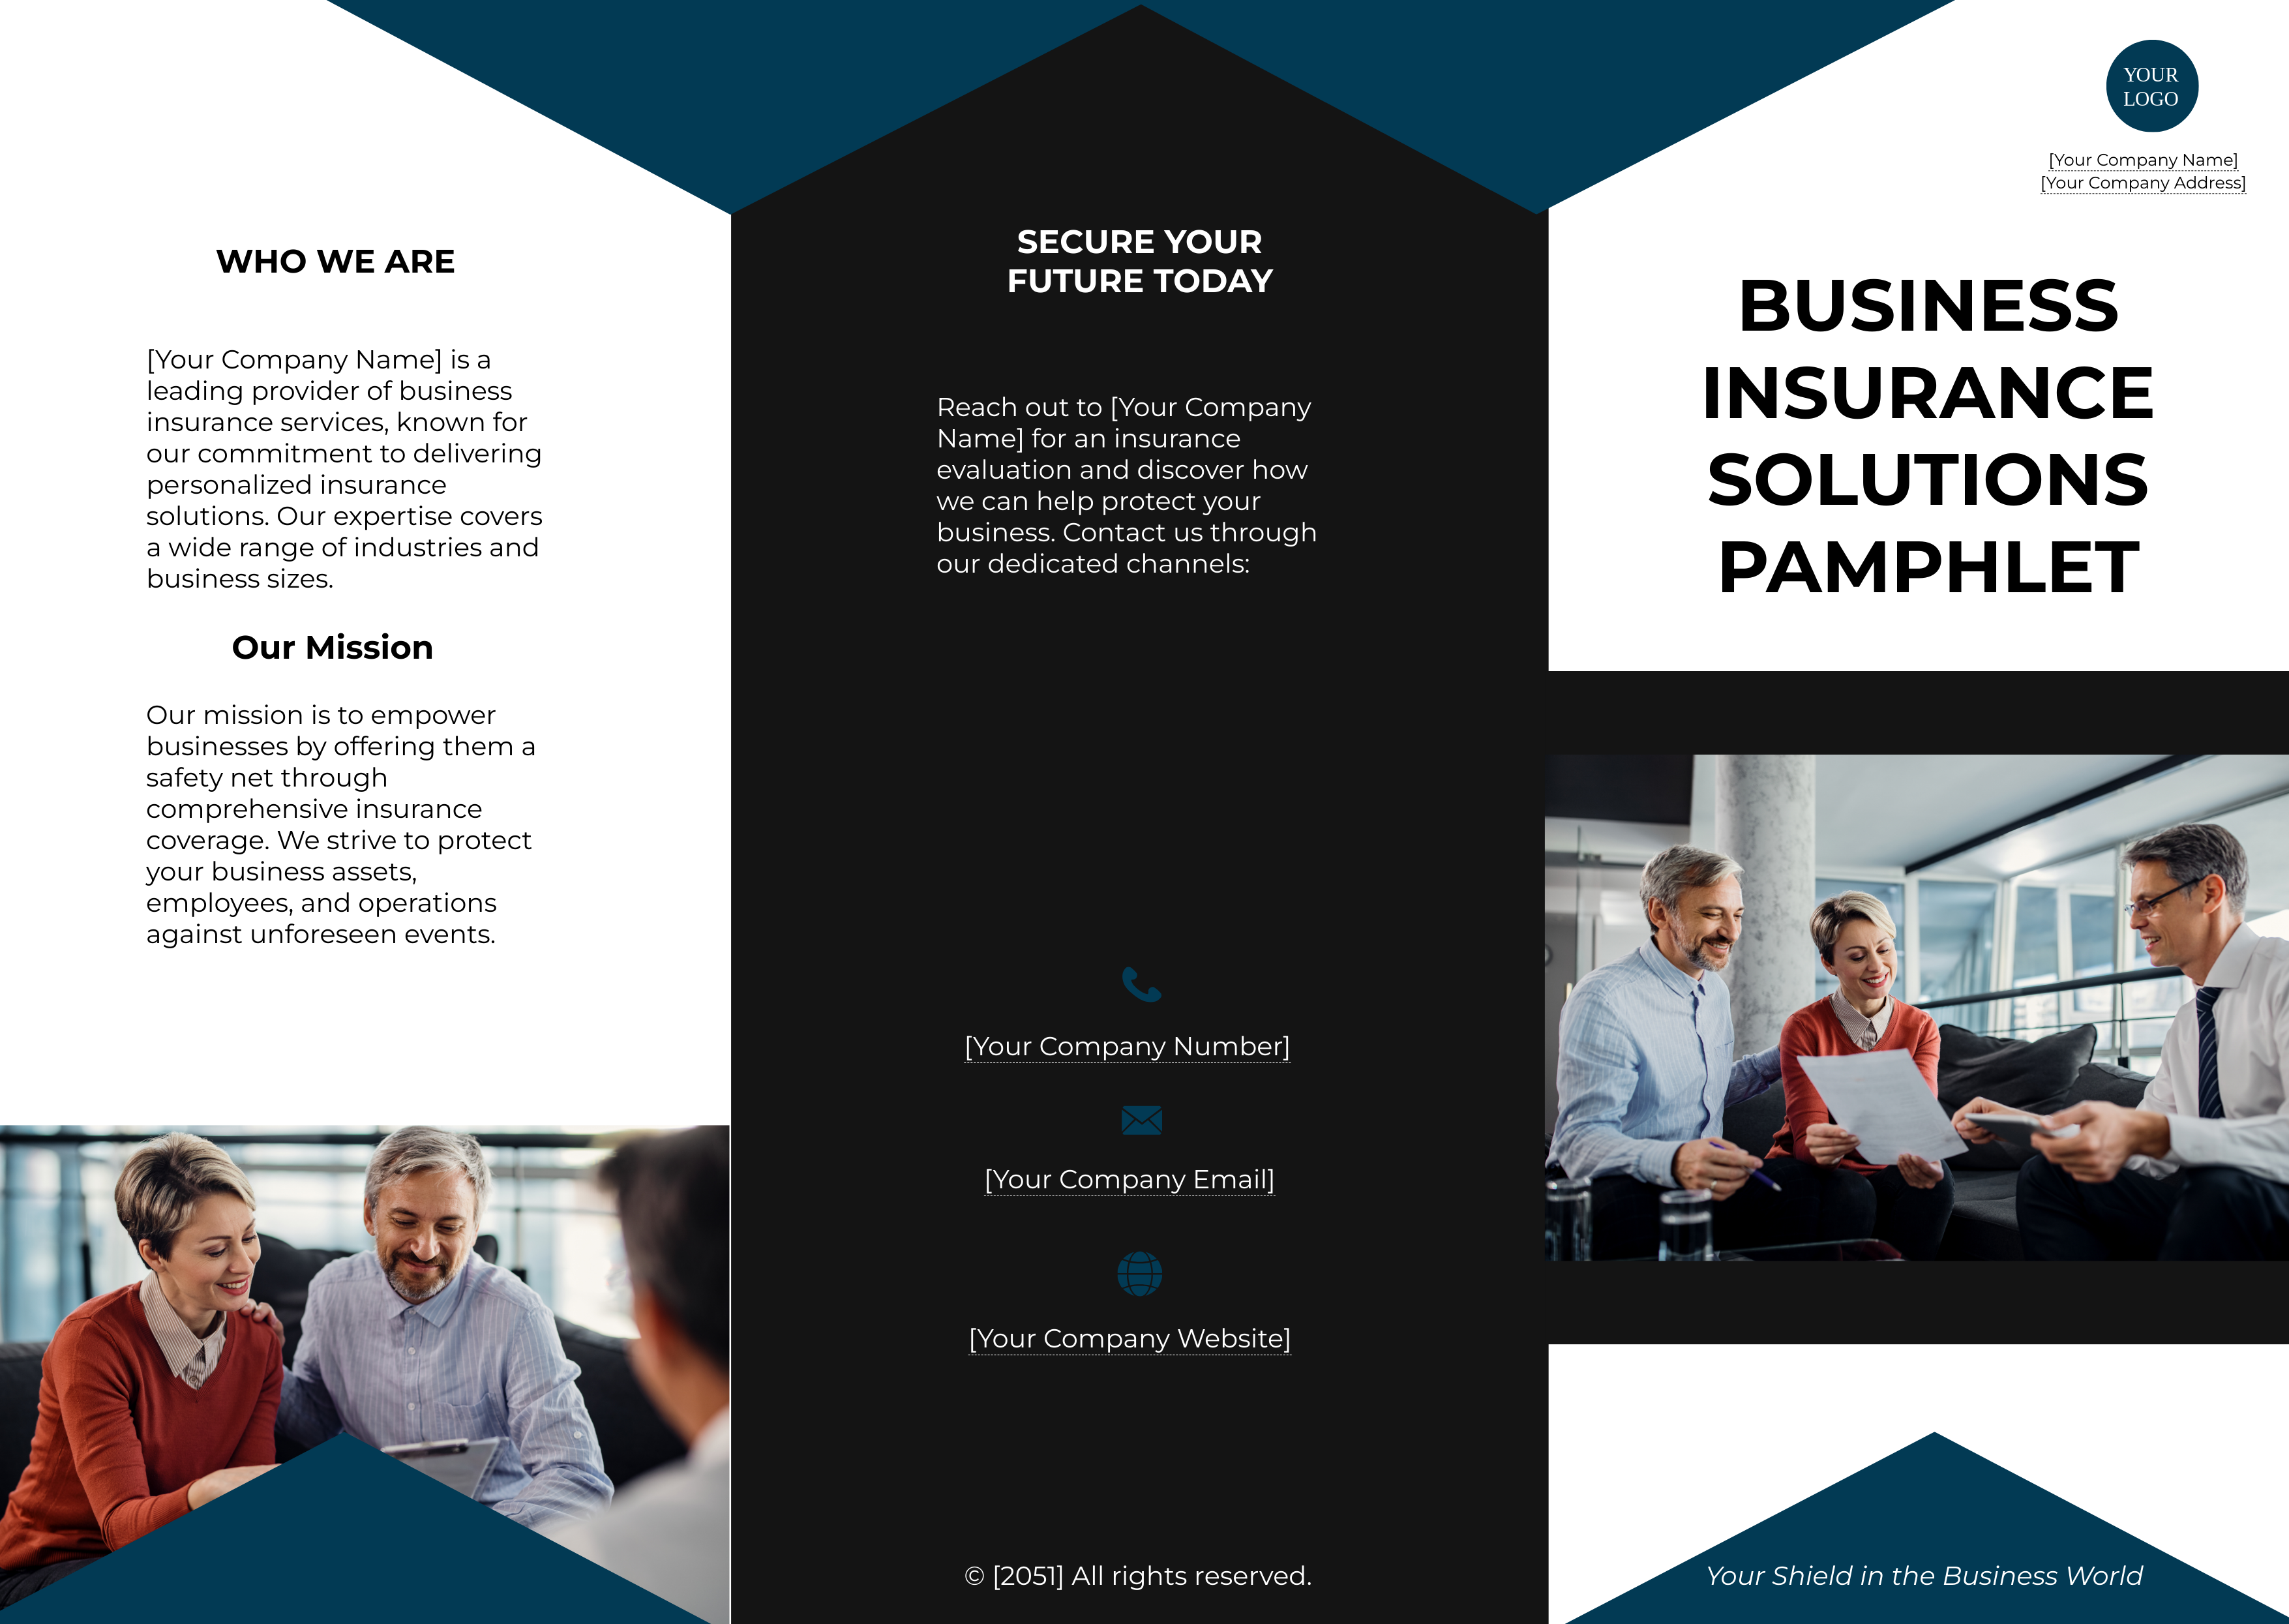 Business Insurance Solutions Pamphlet Template - Edit Online & Download  Example